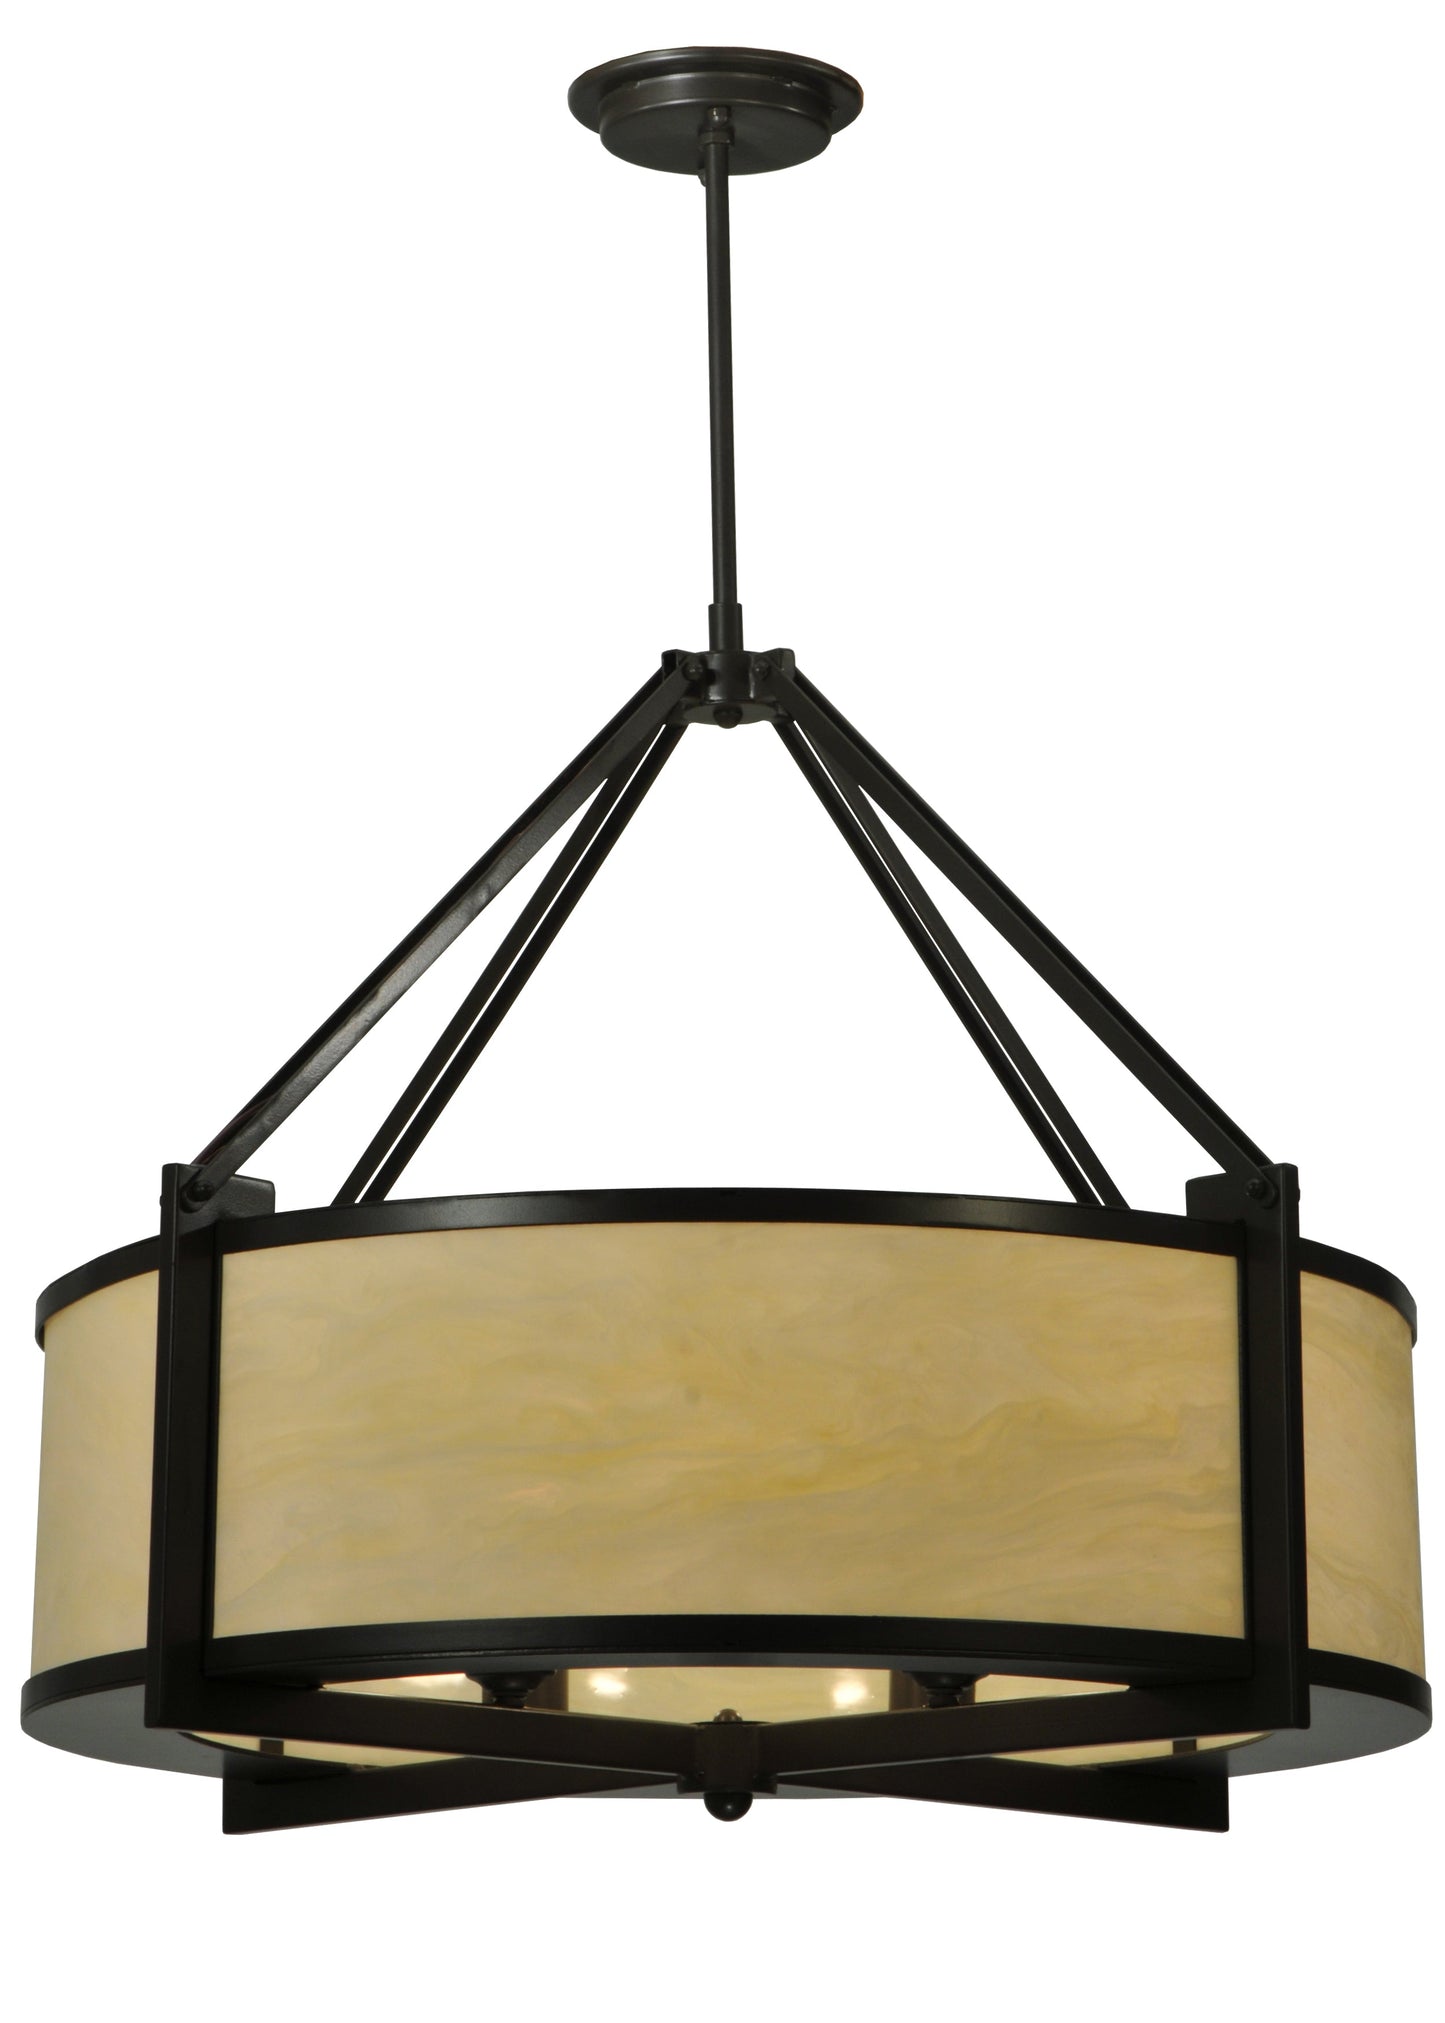 30" Cilindro Cross Hatch Pendant by 2nd Ave Lighting